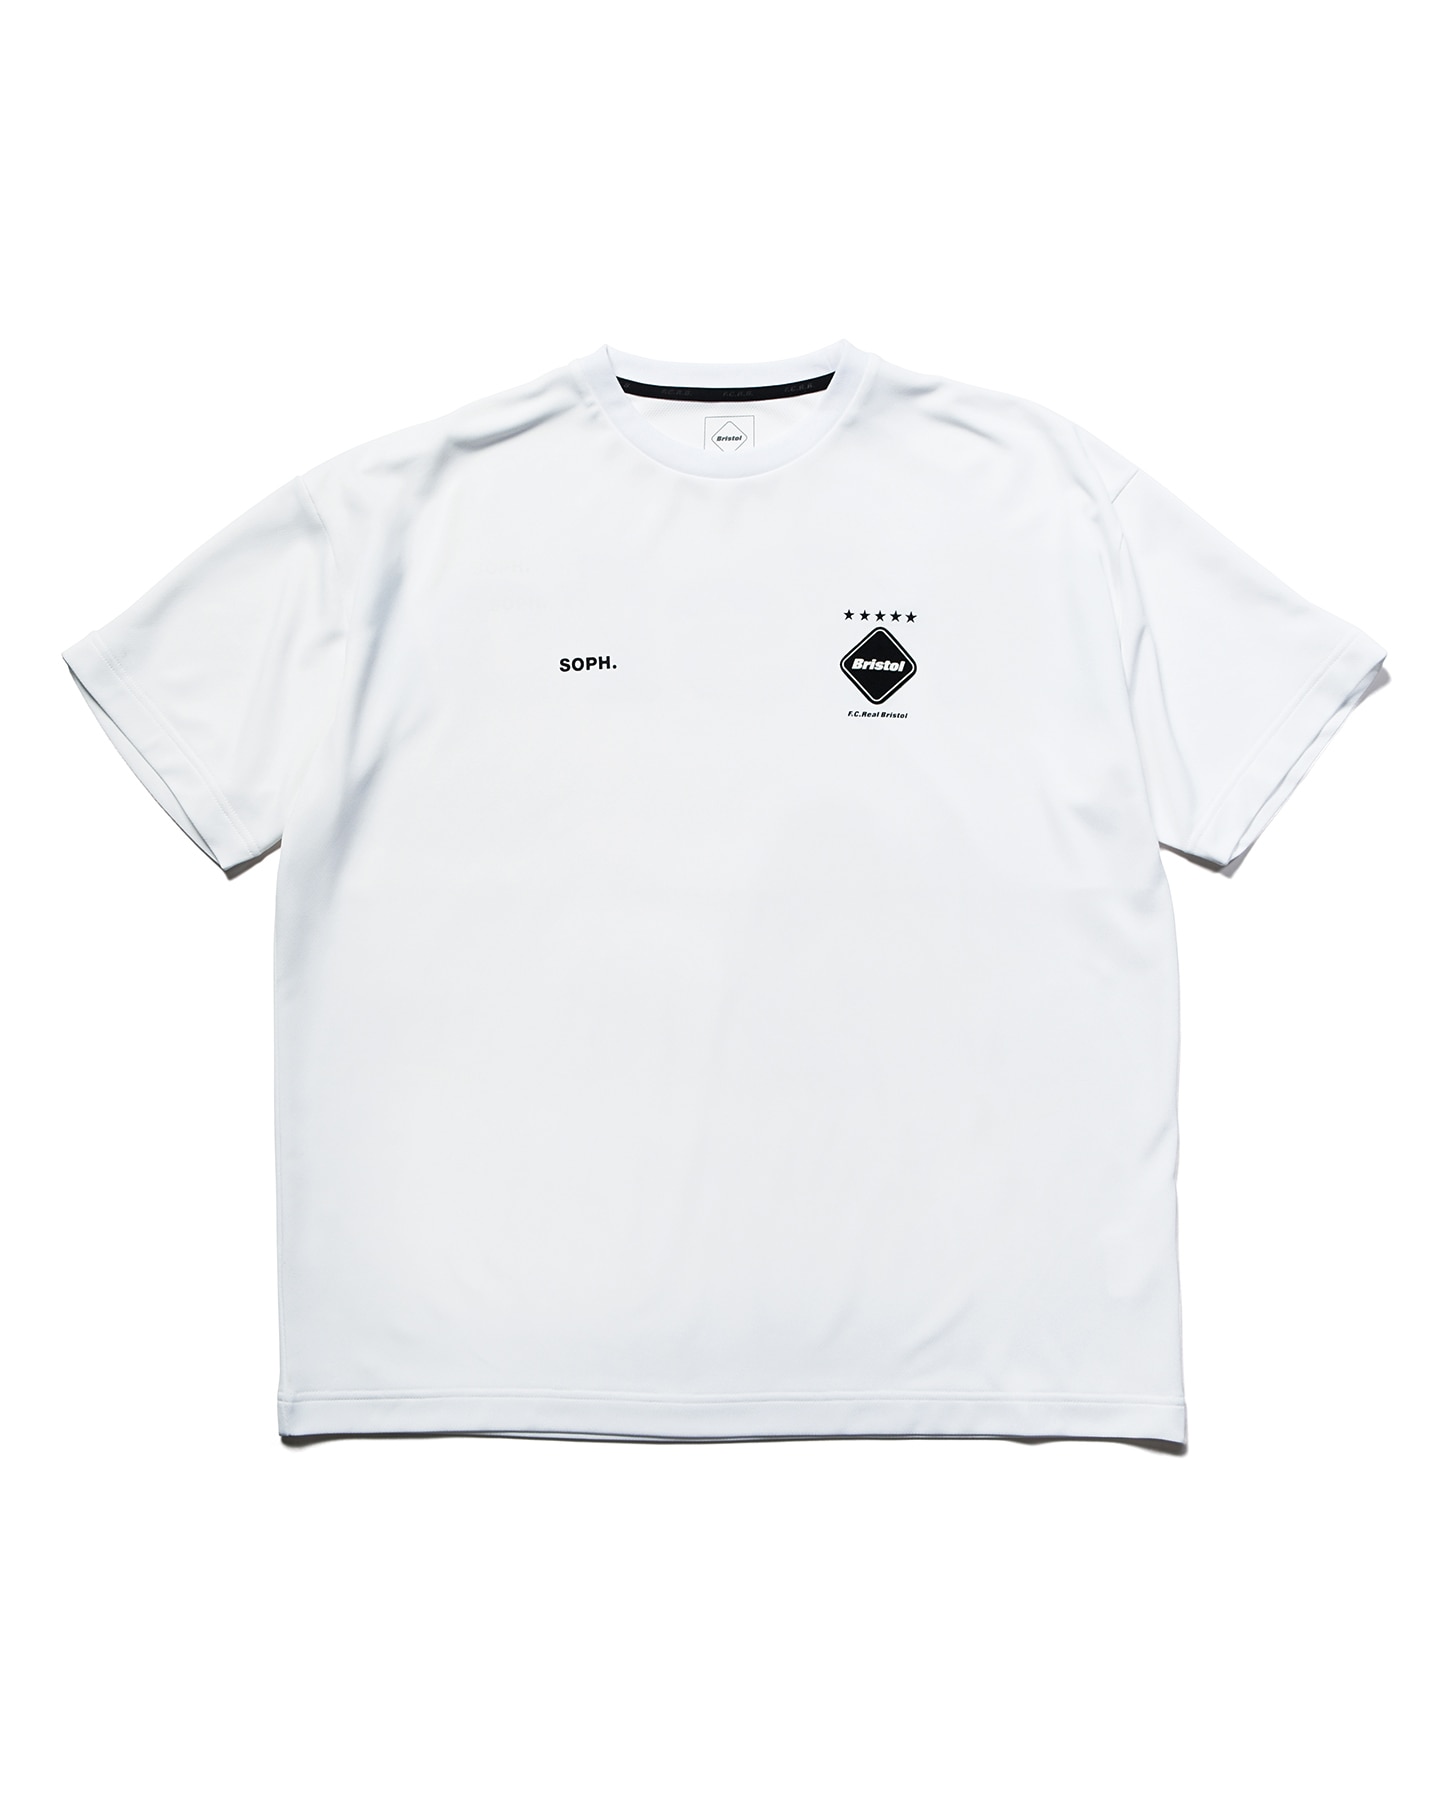 S 送料無料 FCRB 22SS BIG LOGO WIDE TEE WHITE